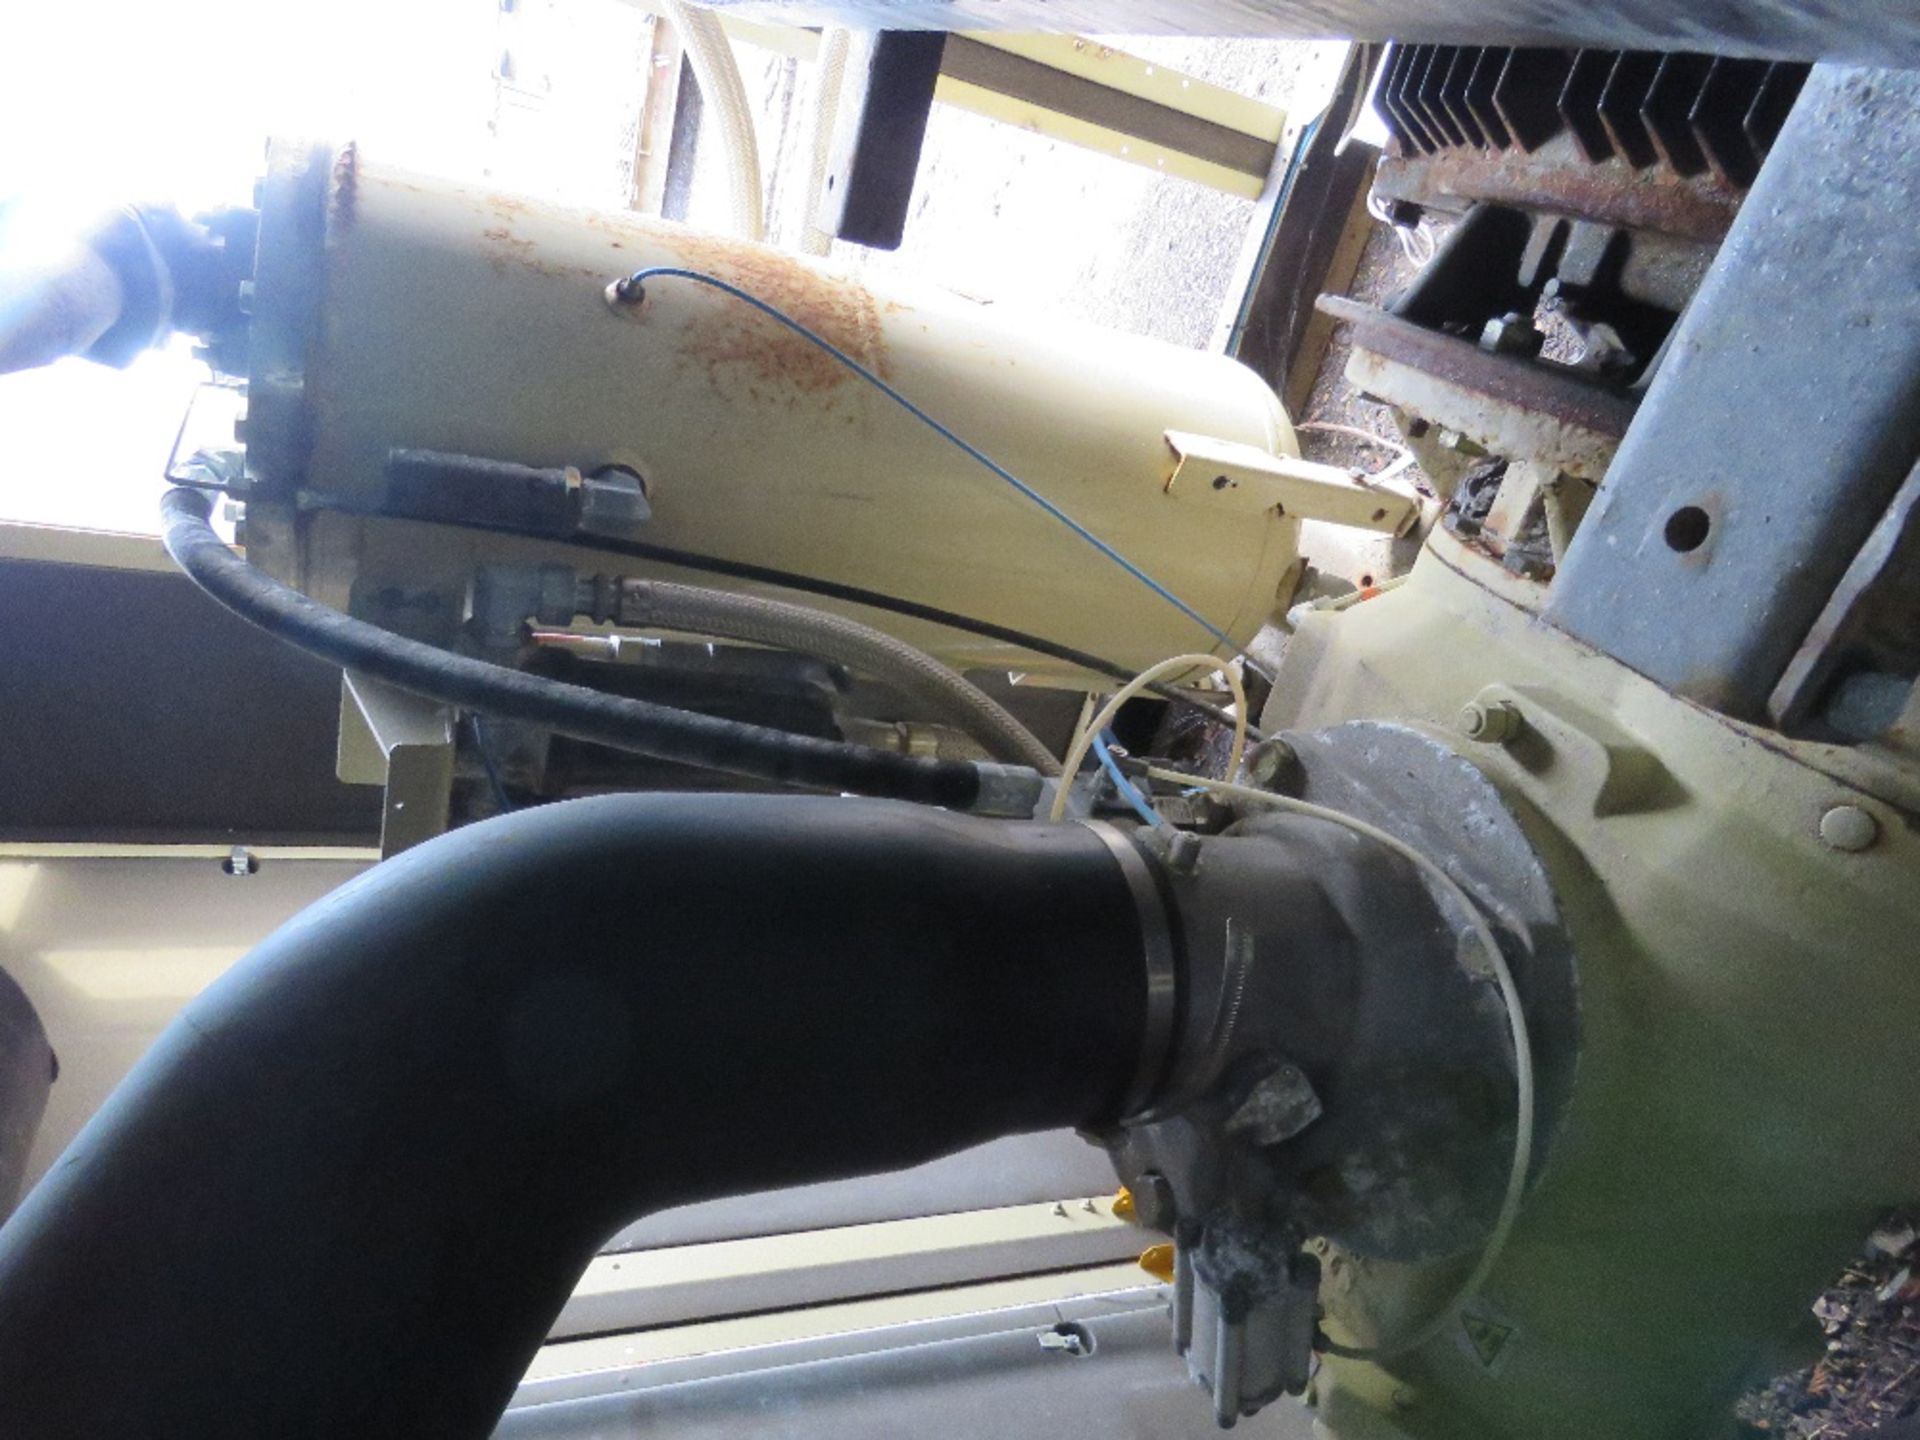 INGERSOLL RAND R132I LARGE CAPACITY COMPRESSOR, YEAR 2016 BUILD, 7.5BAR RATED. WORKING WHEN REMOVED. - Image 9 of 17